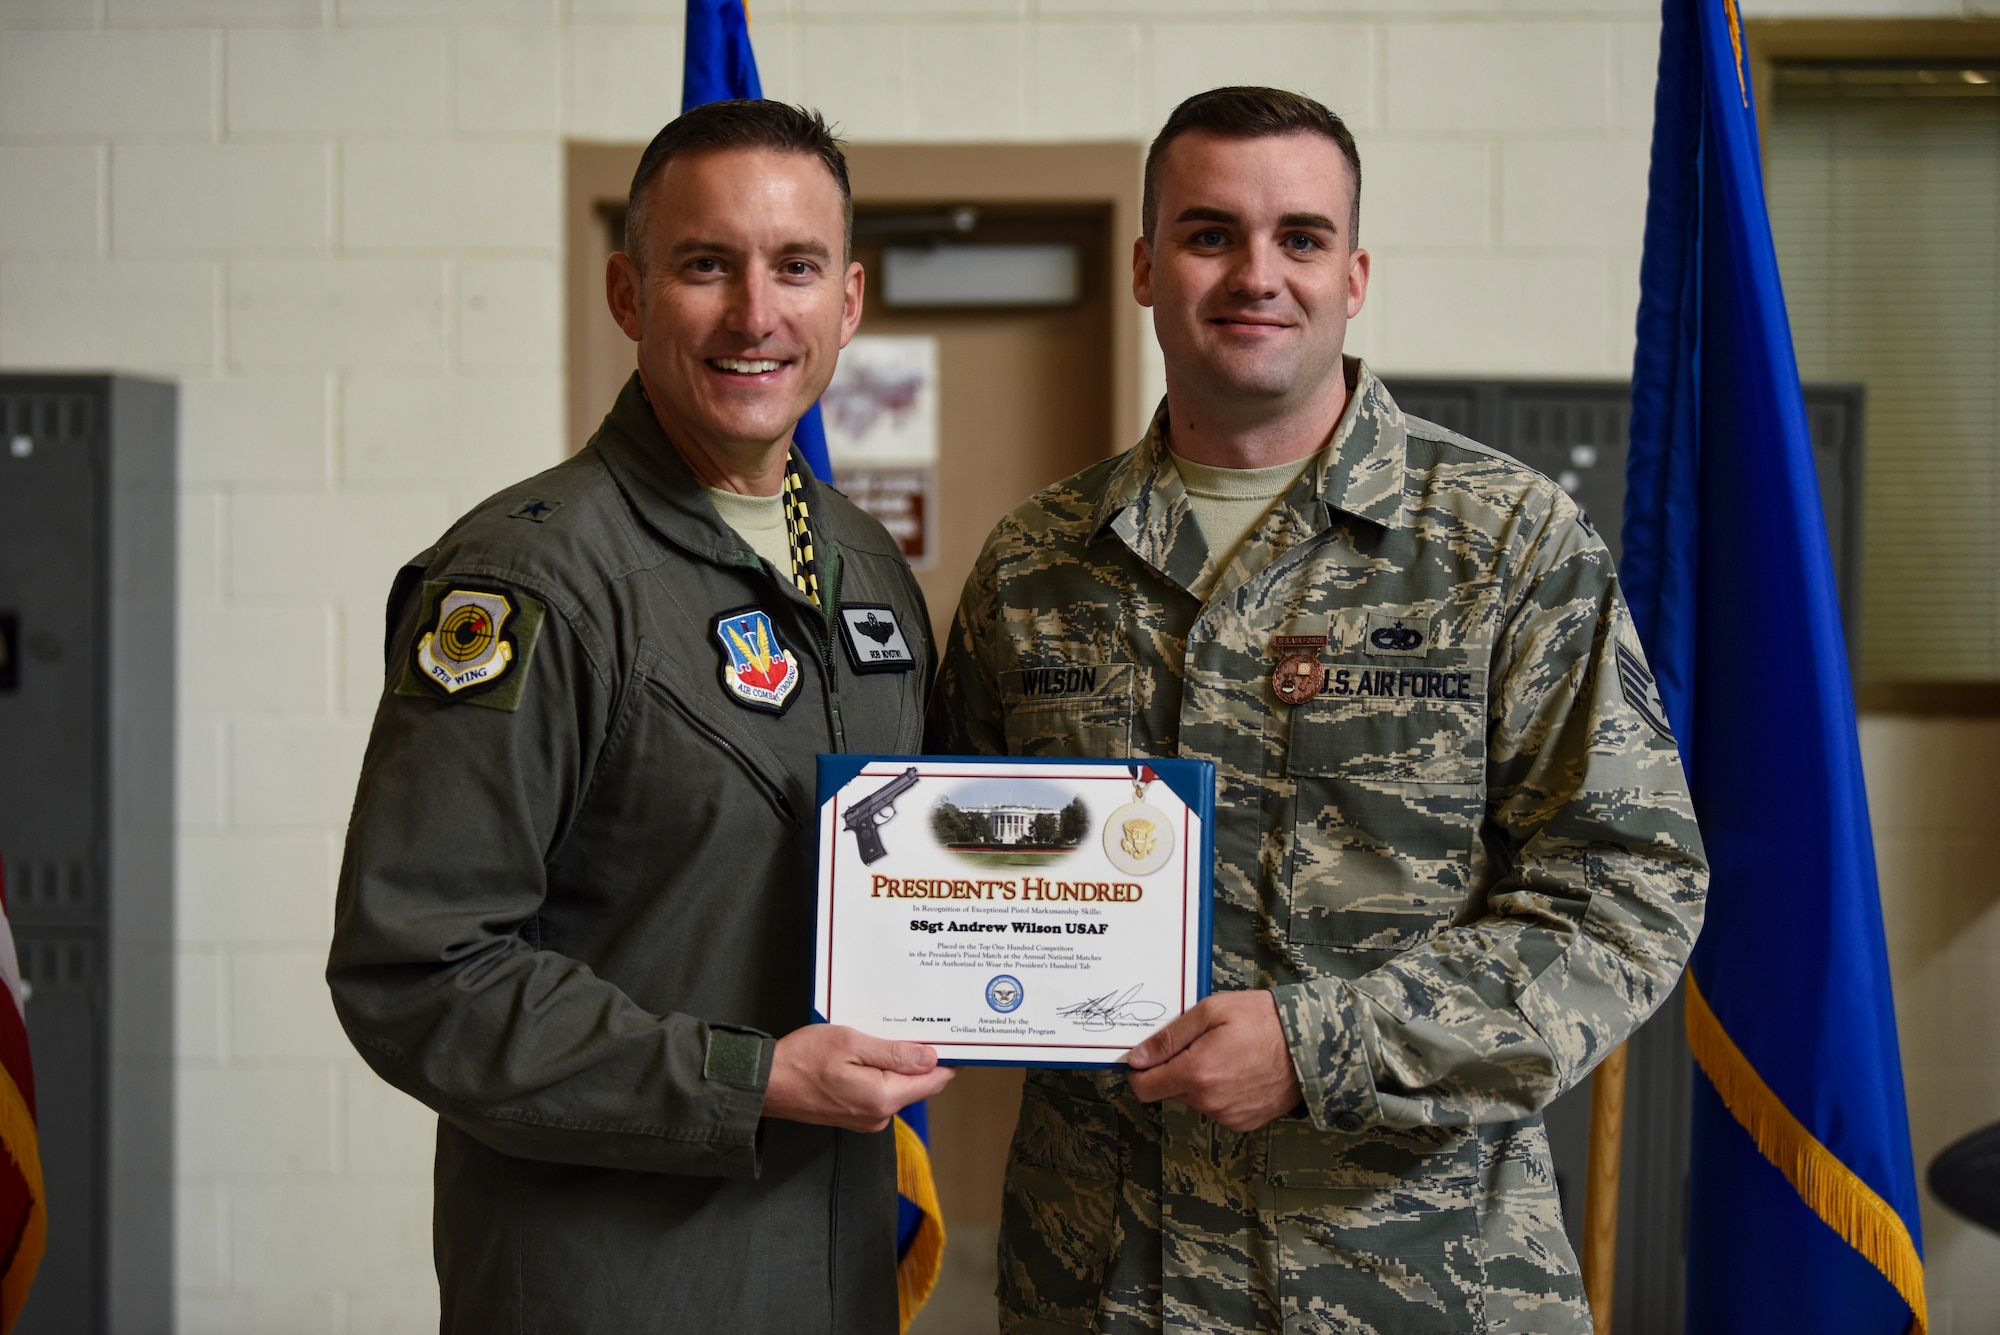 Brig. Gen. Robert G. Novotny, 57th Wing commander, presents the President’s Hundred award to Staff Sgt. Andrew Wilson, 757th Aircraft Maintenance Squadron Strike Aircraft Maintenance Unit F-15E Strike Eagle fighter jet crew chief, at Nellis Air Force Base, Nevada, Aug. 15, 2018. Wilson earned the President’s Hundred tab after shooting a perfect score at the 2018 National Trophy Pistol Matches and Small Arms Firing School at Camp Perry, Ohio. (U.S. Air Force photo by Airman 1st Class Andrew D. Sarver)